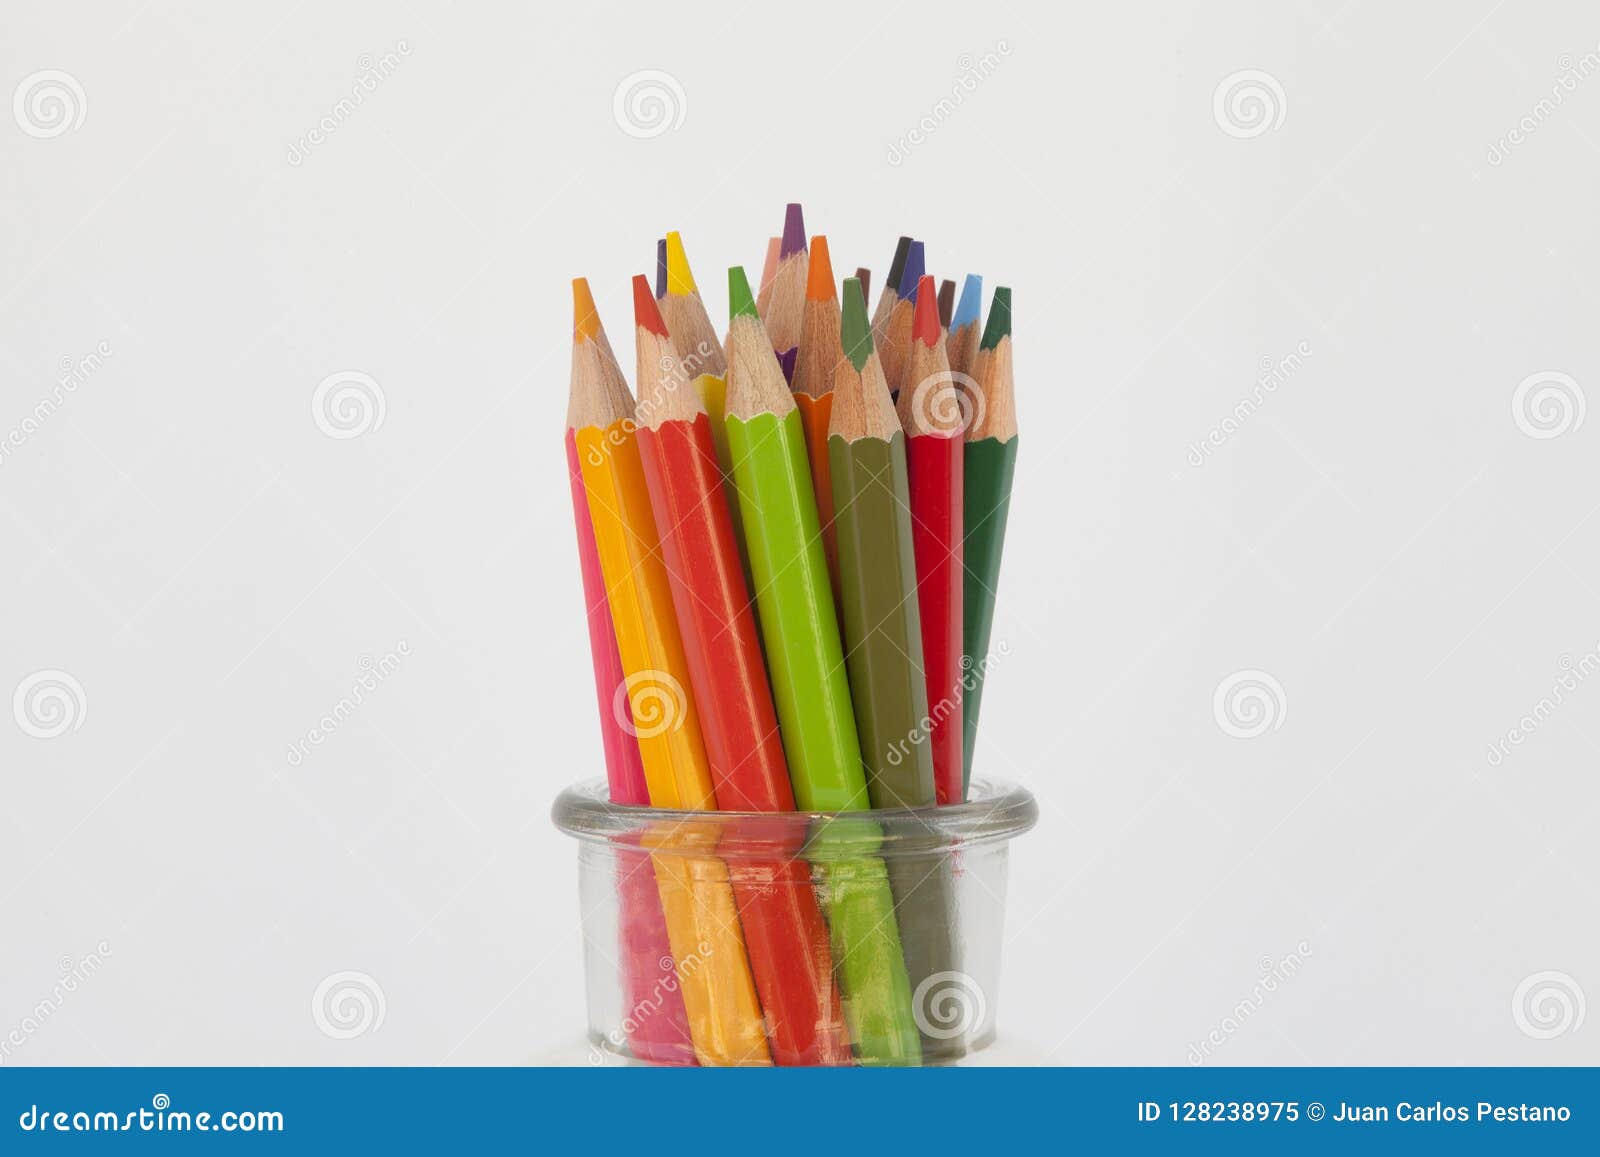 still life with crayons